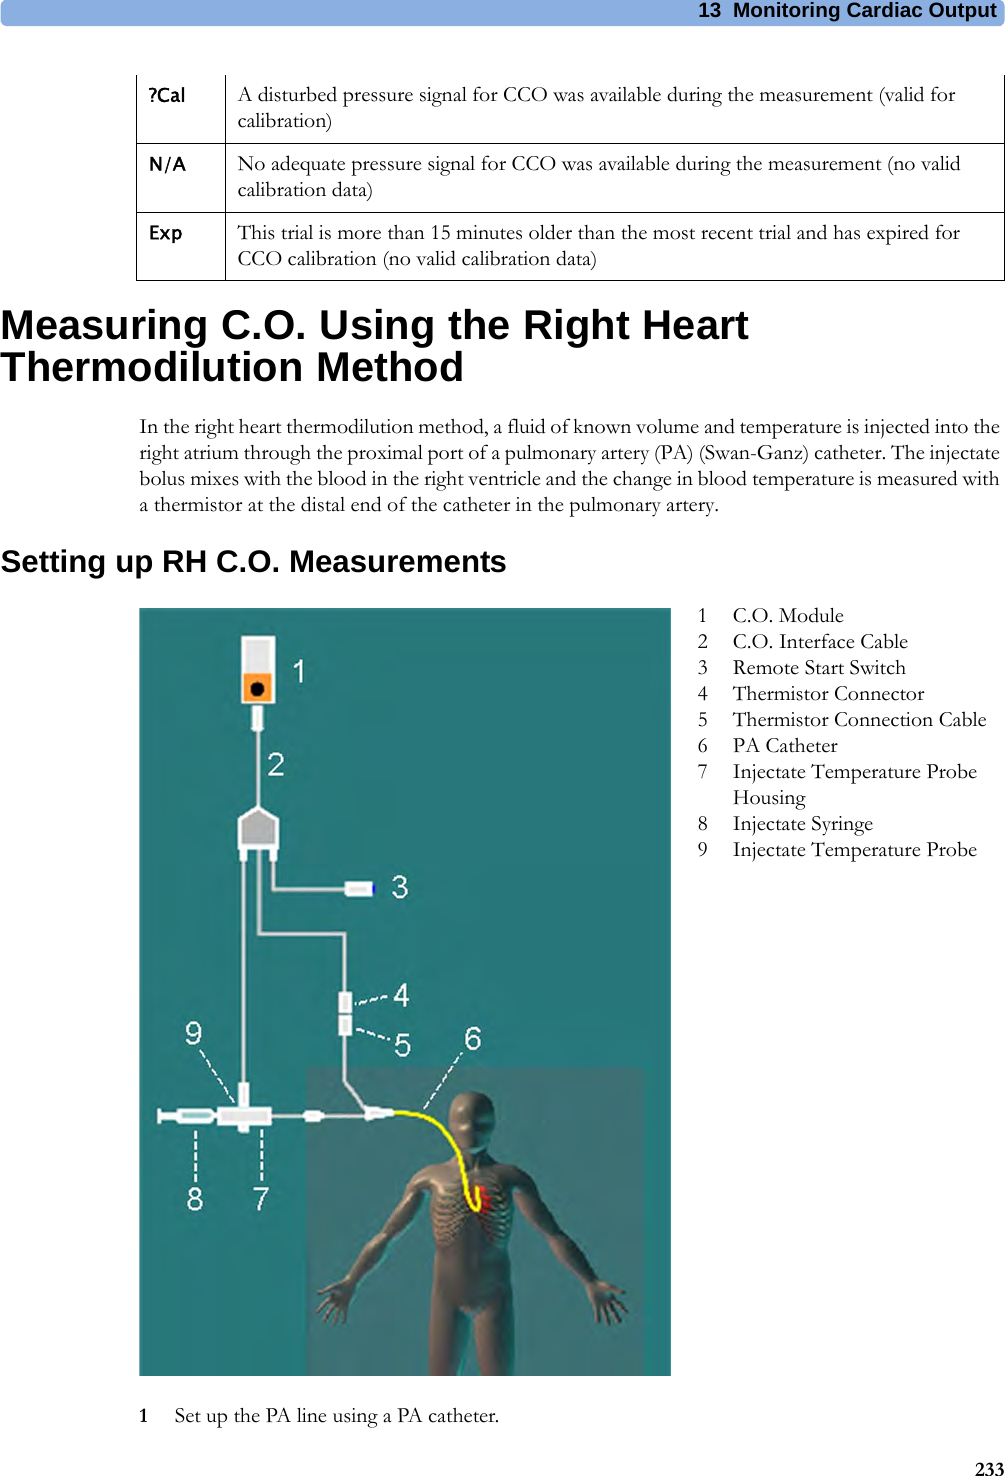 13 Monitoring Cardiac Output233Measuring C.O. Using the Right Heart Thermodilution MethodIn the right heart thermodilution method, a fluid of known volume and temperature is injected into the right atrium through the proximal port of a pulmonary artery (PA) (Swan-Ganz) catheter. The injectate bolus mixes with the blood in the right ventricle and the change in blood temperature is measured with a thermistor at the distal end of the catheter in the pulmonary artery.Setting up RH C.O. Measurements1Set up the PA line using a PA catheter.?Cal A disturbed pressure signal for CCO was available during the measurement (valid for calibration)N/A No adequate pressure signal for CCO was available during the measurement (no valid calibration data)Exp This trial is more than 15 minutes older than the most recent trial and has expired for CCO calibration (no valid calibration data)1C.O.Module2 C.O. Interface Cable3 Remote Start Switch4 Thermistor Connector5 Thermistor Connection Cable6 PA Catheter7 Injectate Temperature Probe Housing8 Injectate Syringe9 Injectate Temperature Probe